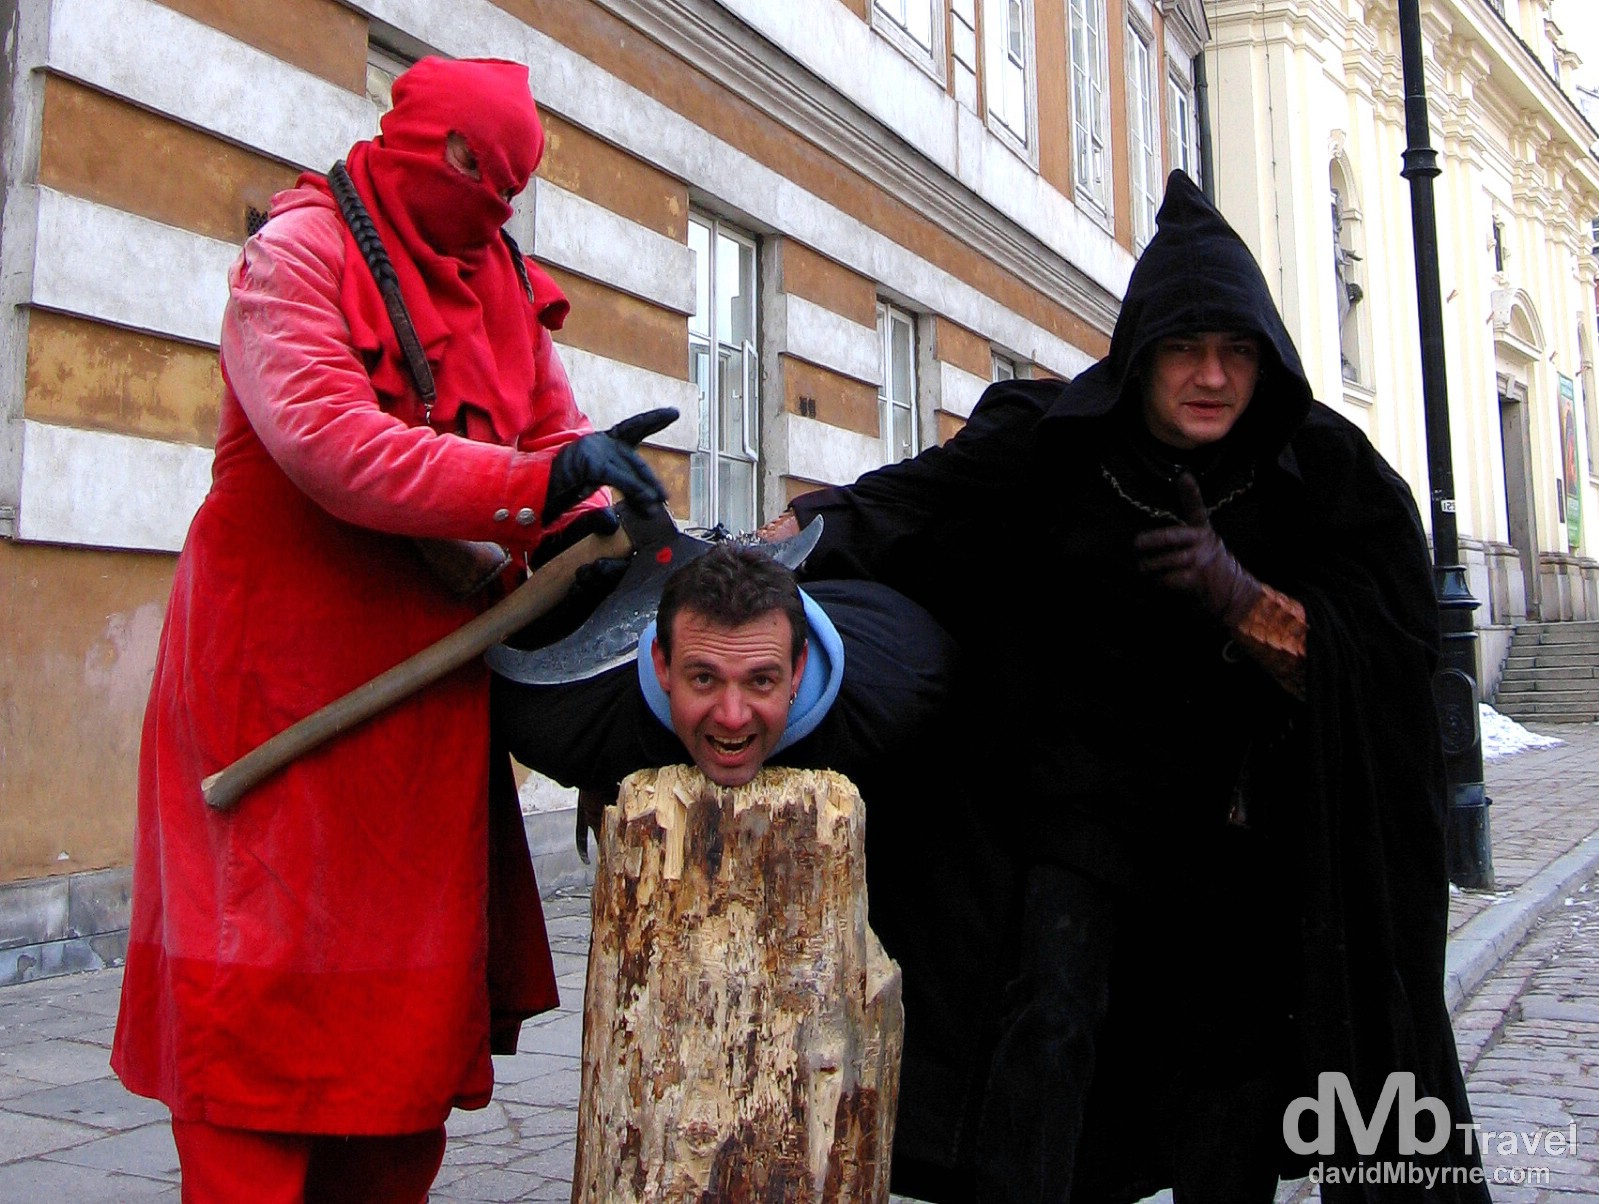 Execution in Old Town, Warsaw, Poland. March 5, 2005. 